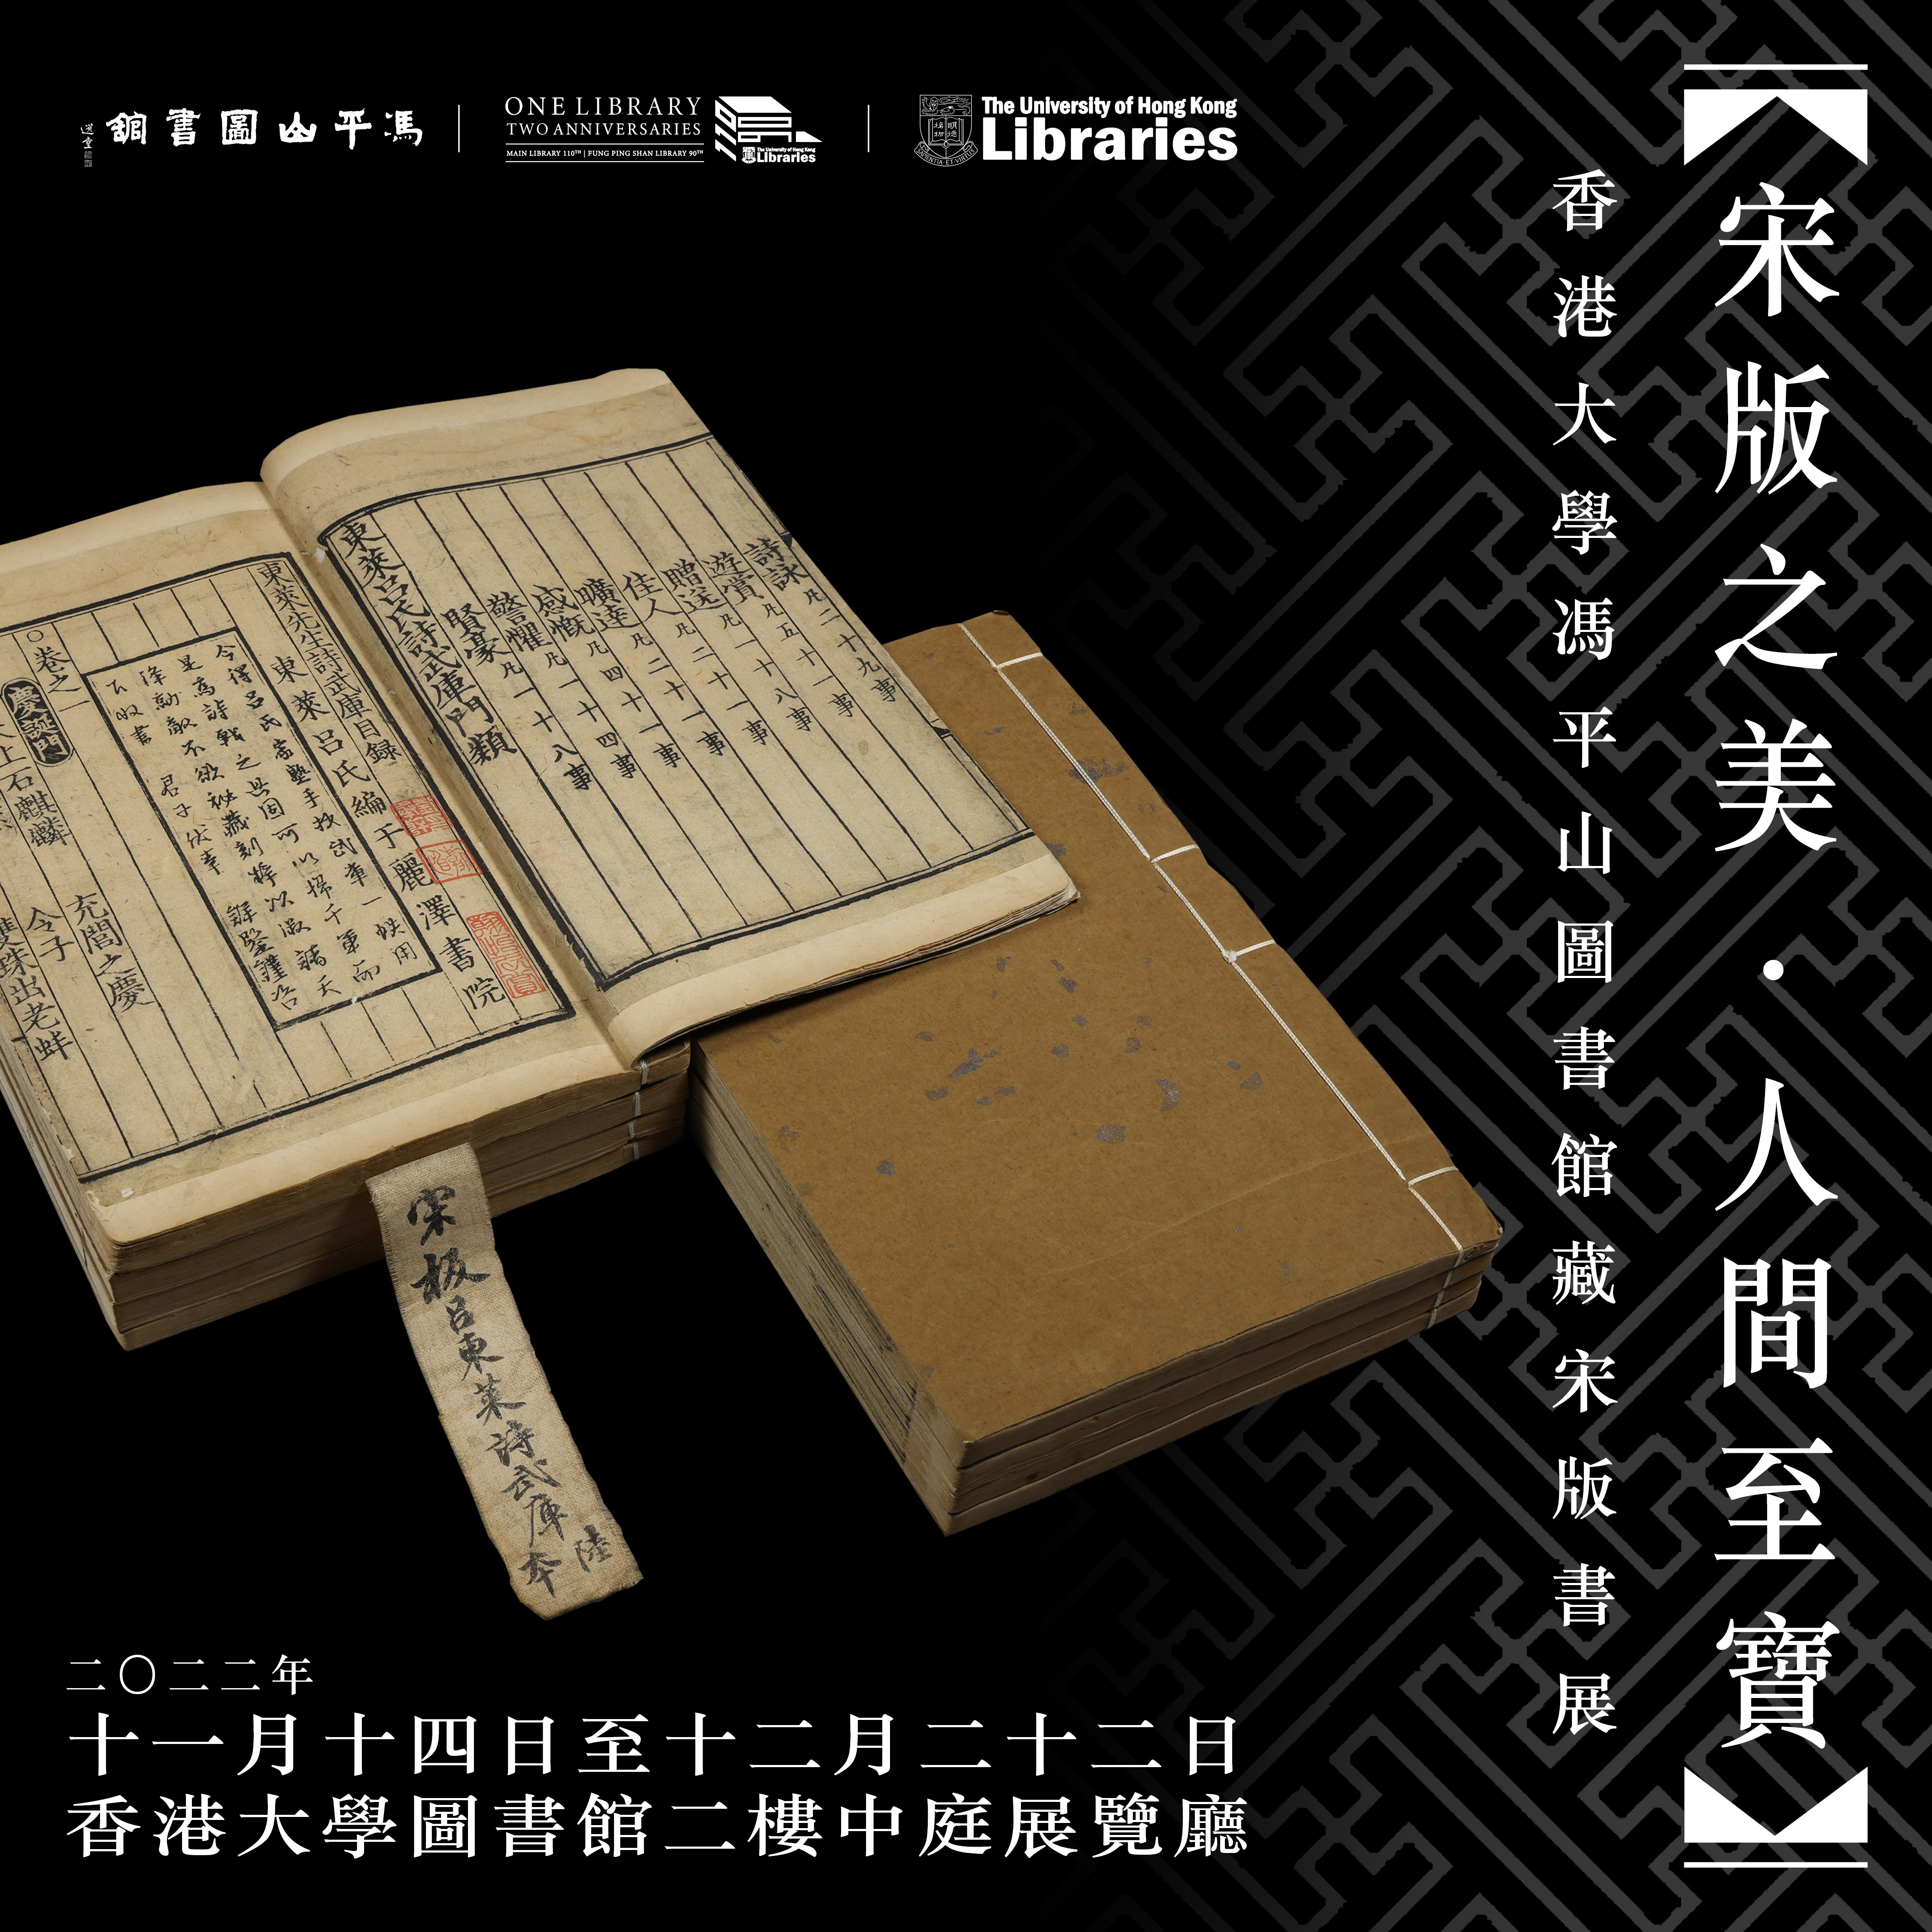 Beauty and Treasures – Block-printed edition of the Song dynasty